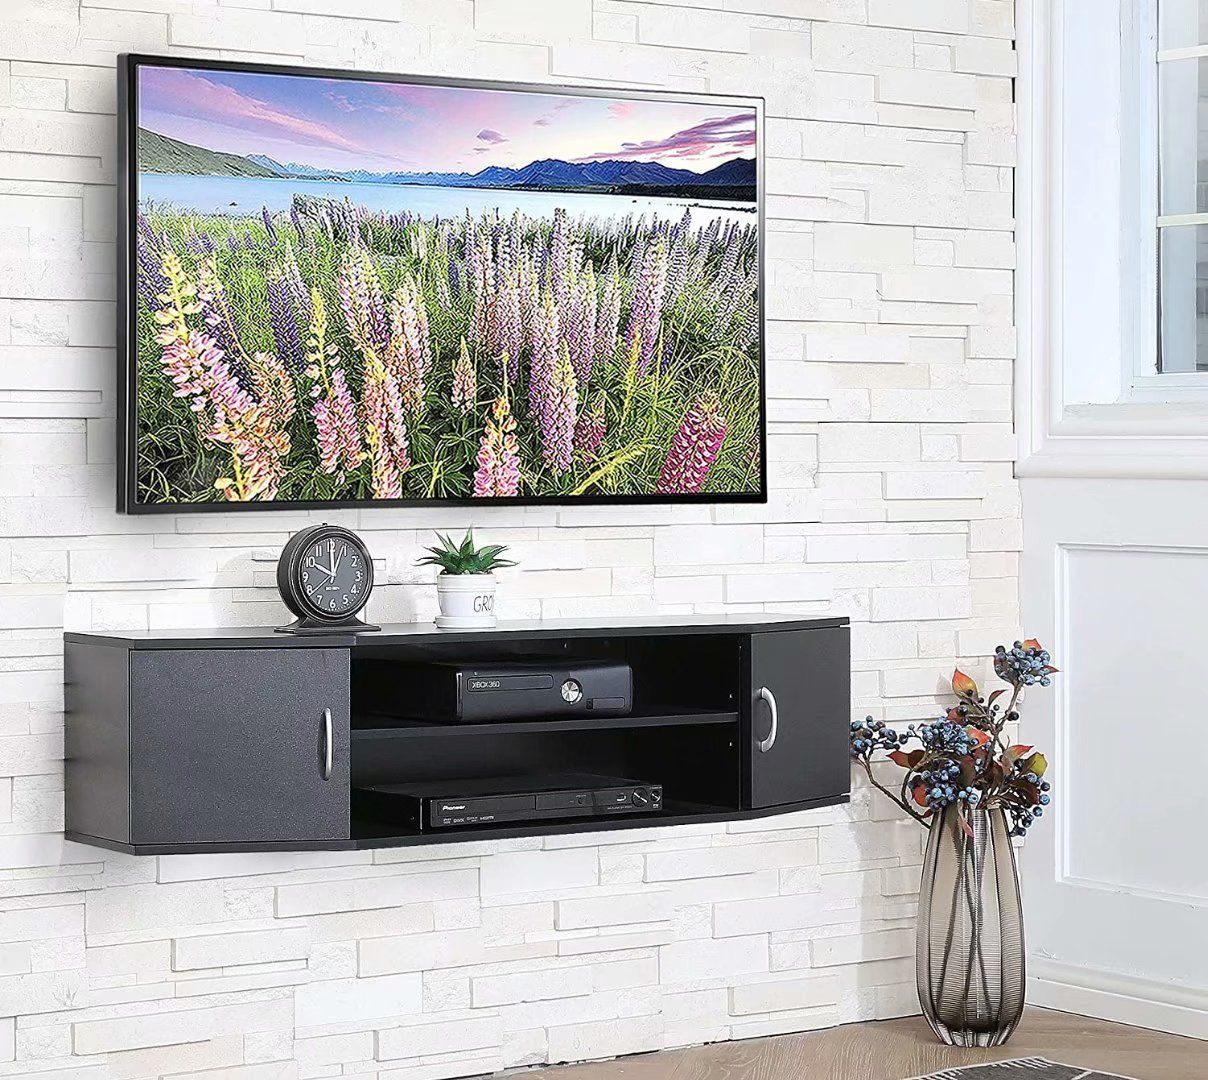 Fitueyes Black Wall Mounted Media Console Floating Tv Throughout Wall Mounted Tv Stand Entertainment Consoles (View 3 of 15)